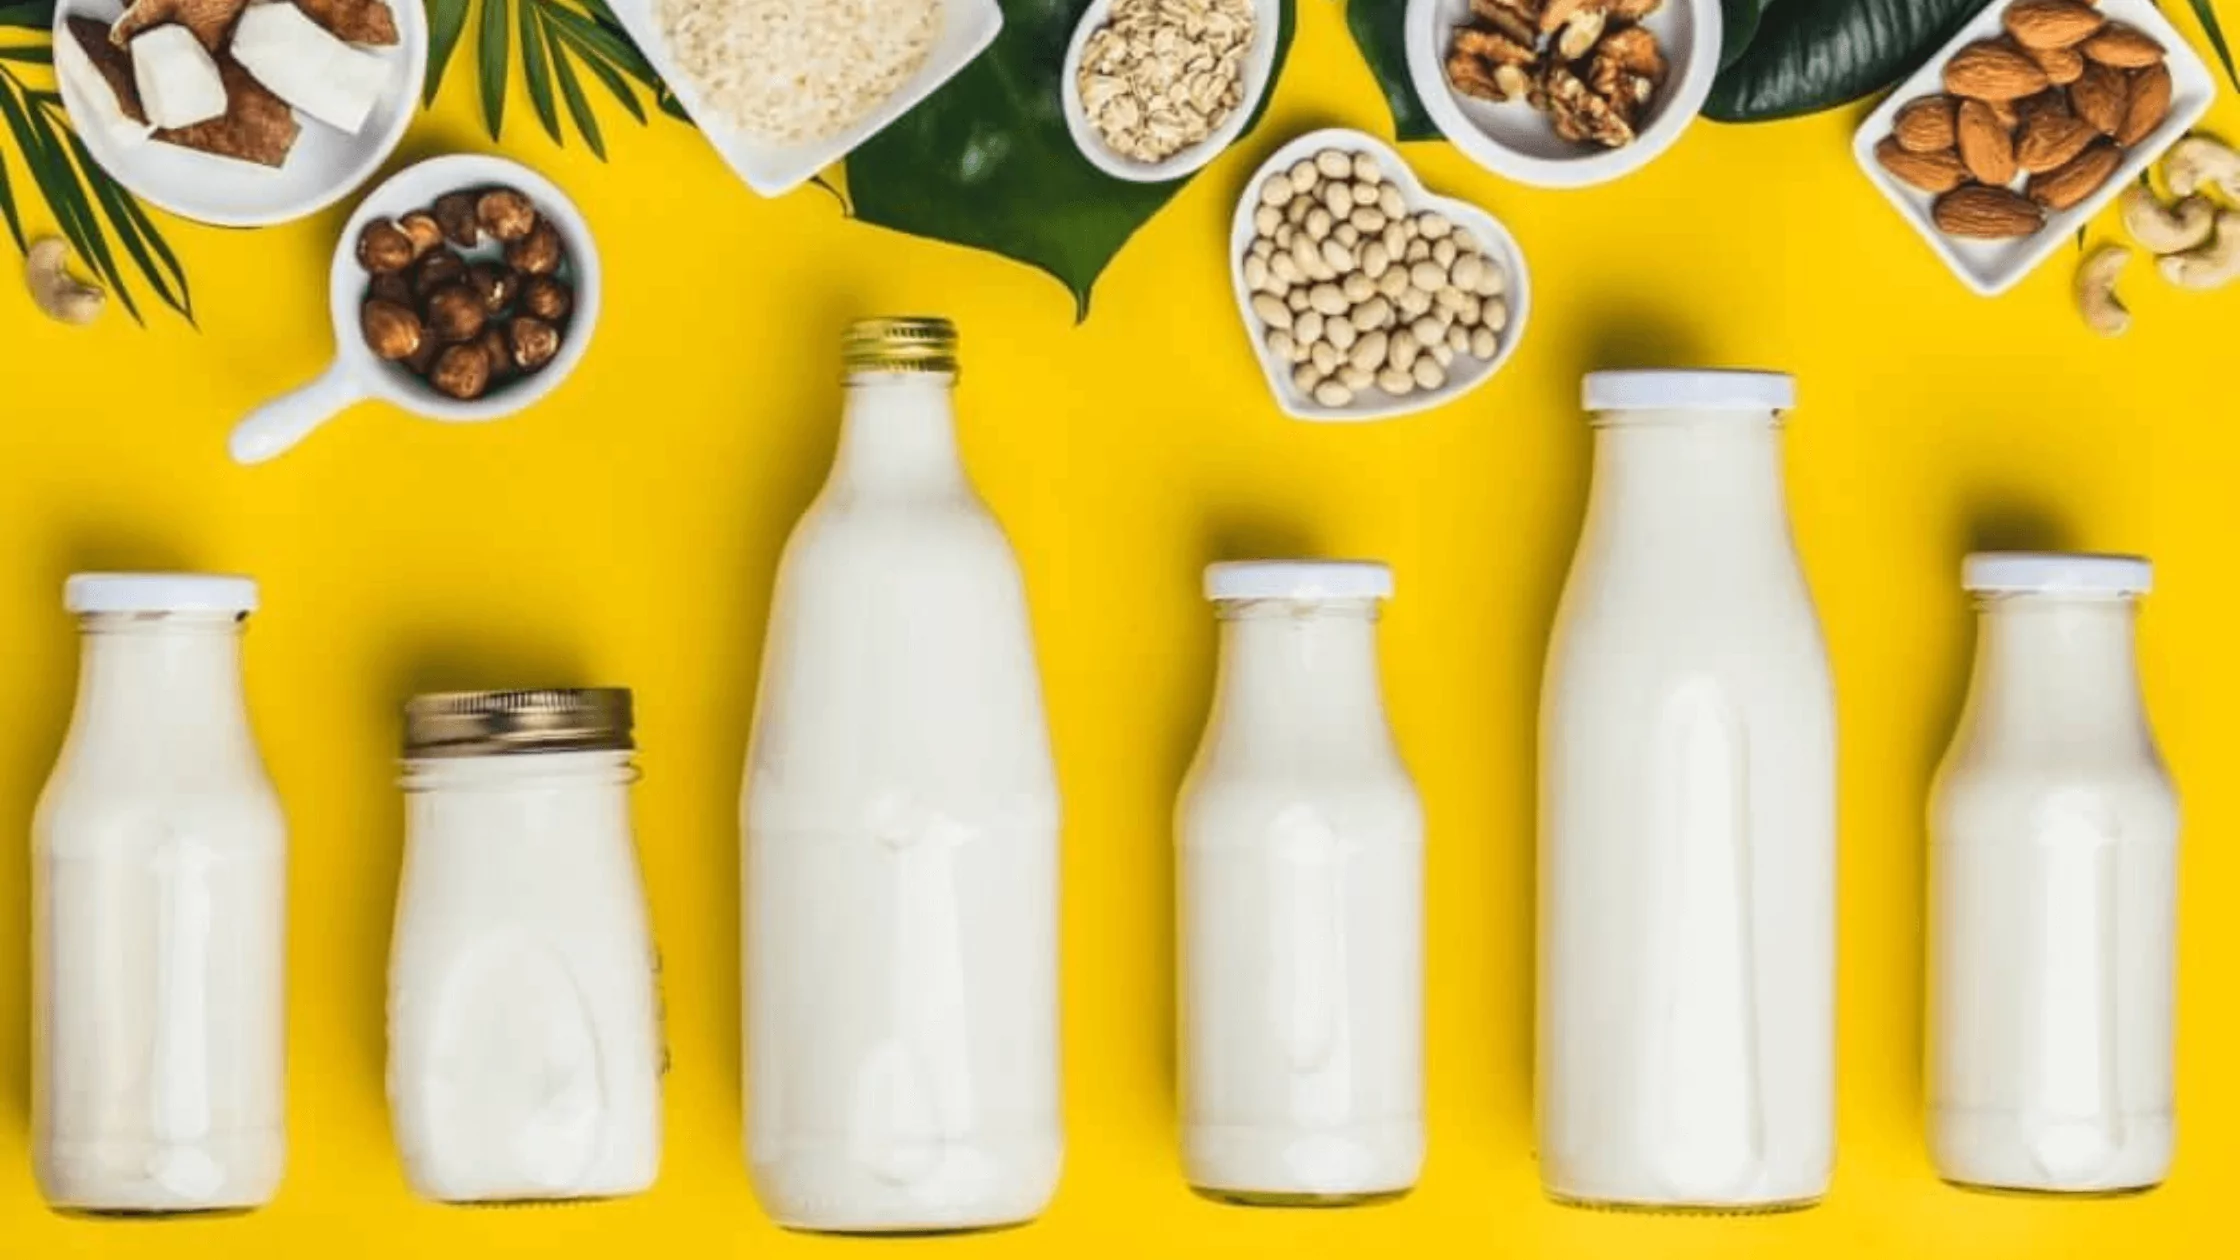 9 Best And Worst Milk For Lowering Cholesterol!